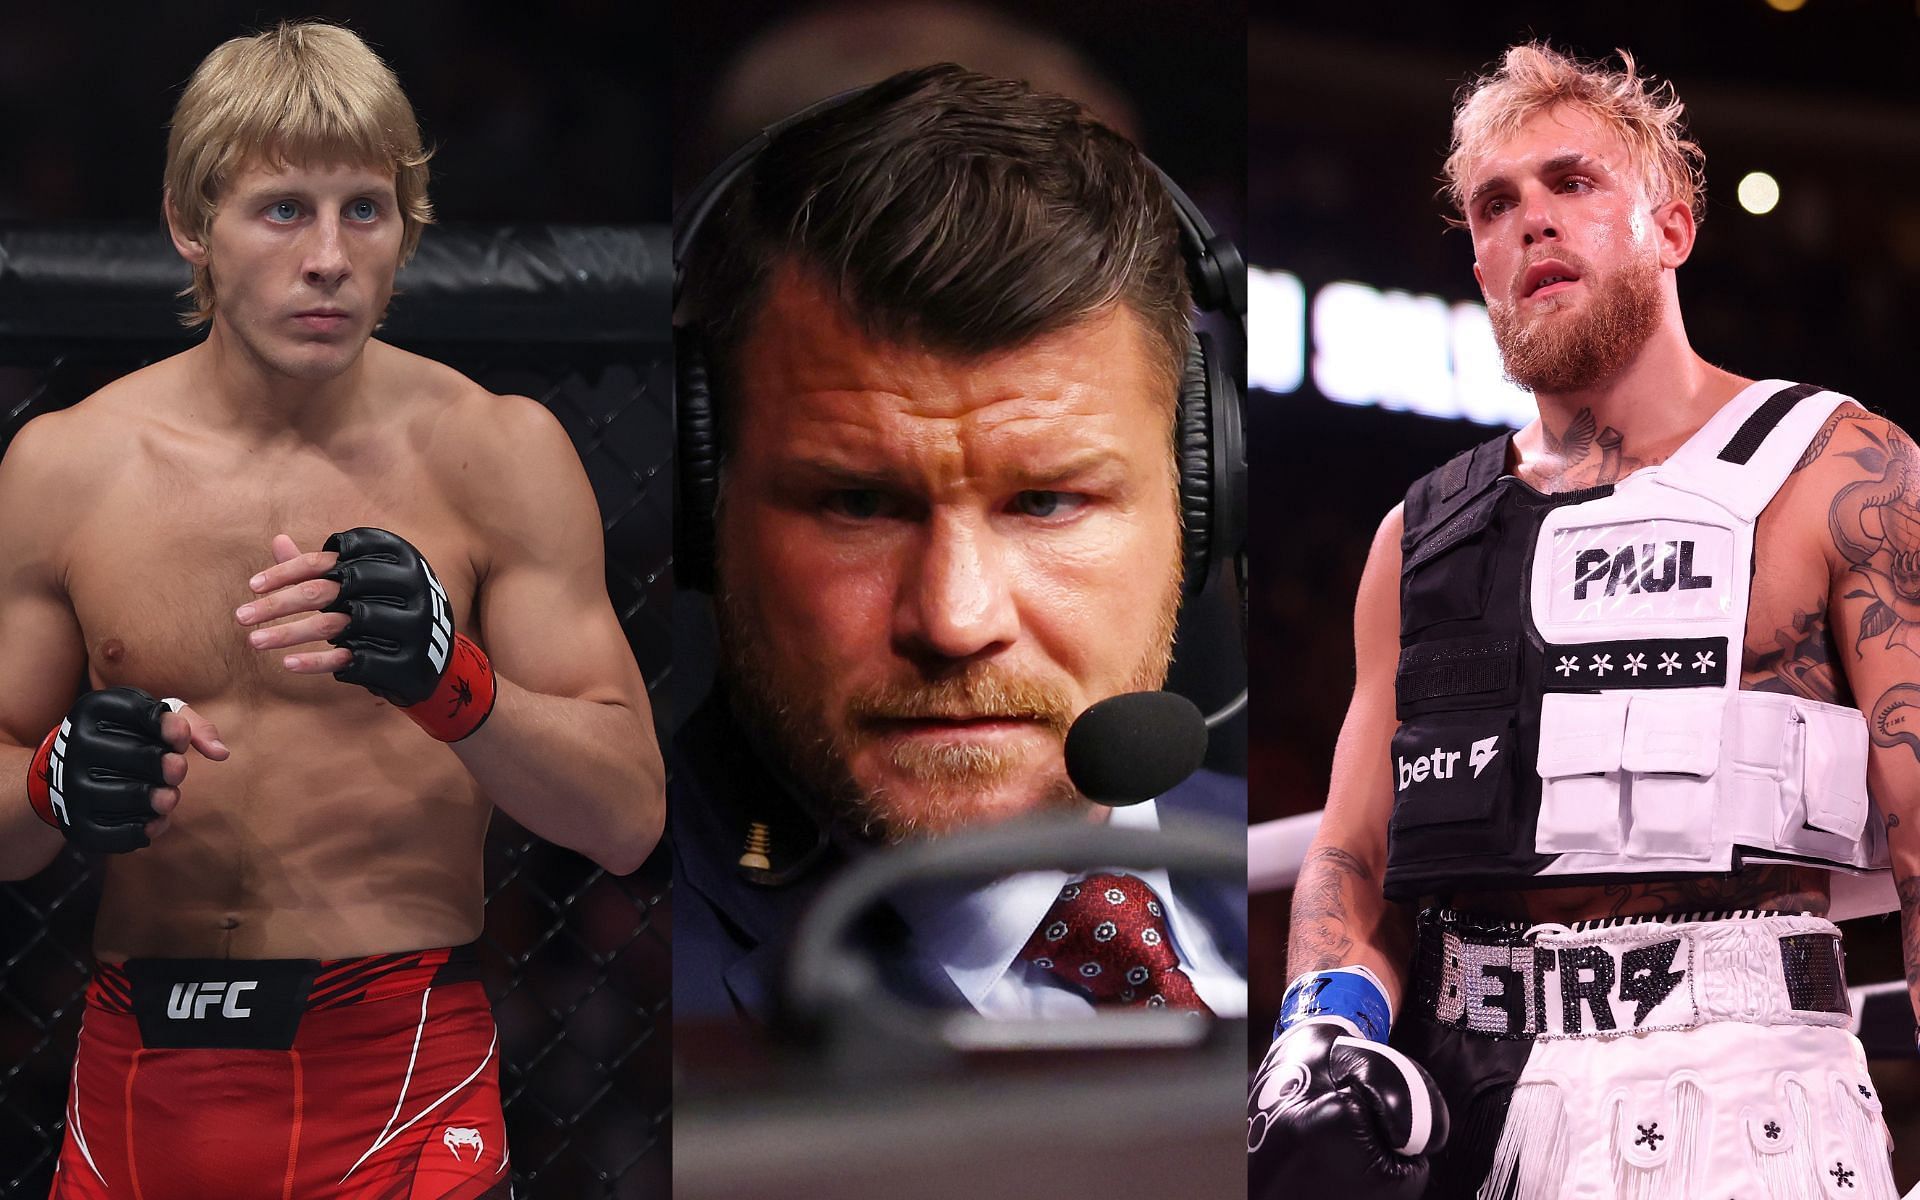 Paddy Pimblett (left), Michael Bisping (center), and Jake Paul (right). [via Getty Images]